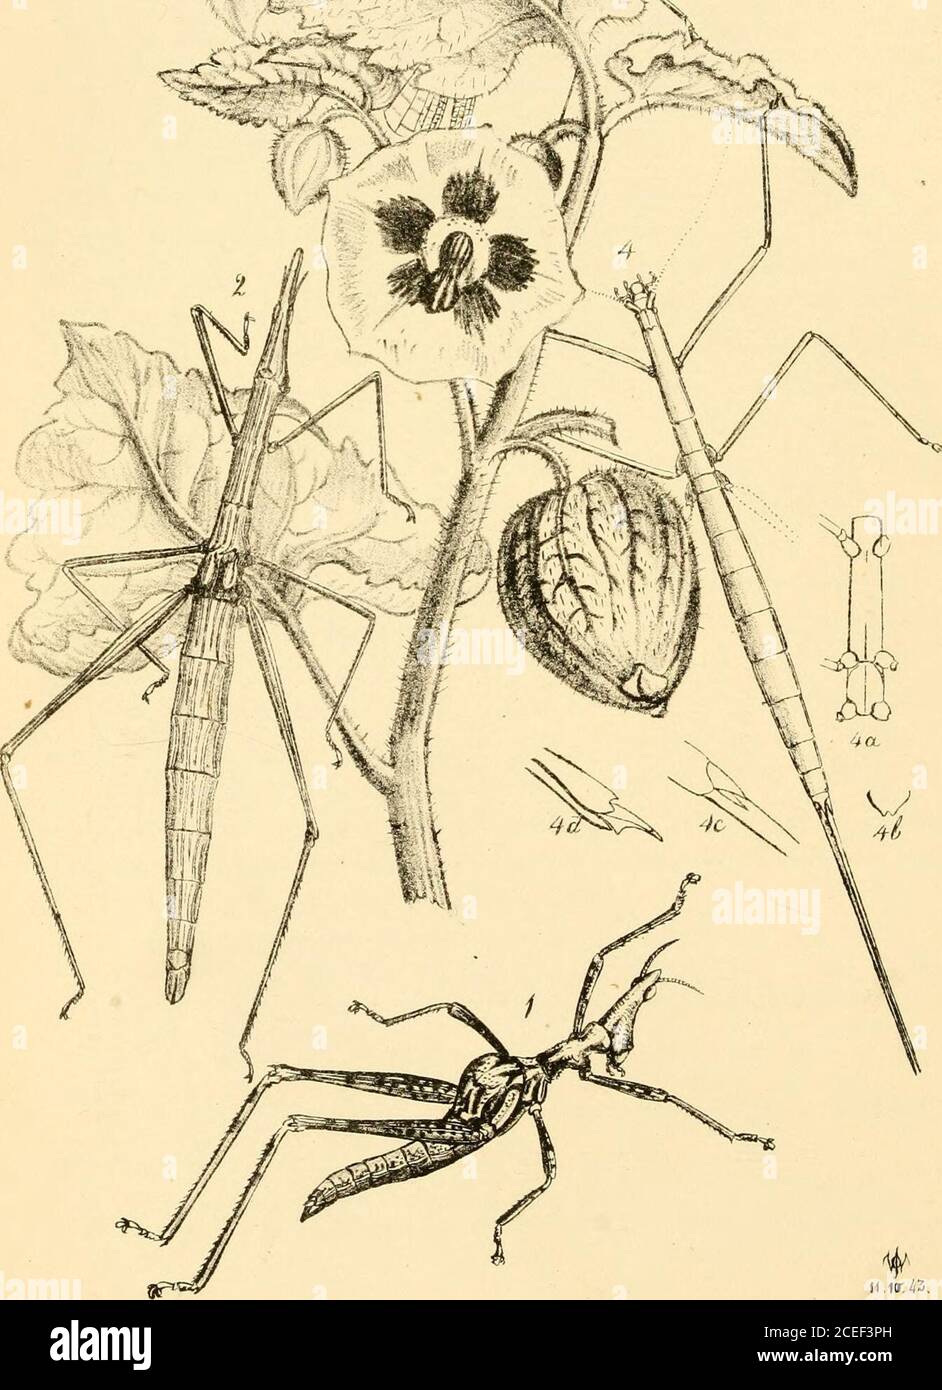 . Arcana entomologica, or, Illustrations of new, rare, and interesting insects. ^ , ,. 53 PLATE LXIII. DESCRIPTIONS OF SOME ORTHOPTEROUS INSECTS BELONGINGTO THE SECTION SALTATORIA. PROSCOPIA OCCIDENTALS. Westw.(Plate 63, fig. 1.)P. fulva, nigro fuscoque varia, rugoso-punctata, capite ante oculos conico, prothorace capitislongitudine margine antico dilatato, metathorace valde tumido. Long. corp. unc. If. $ ,unc. 2. J .Habitat. Valparaiso, Chili. In Mus. Hope, and Mus. Britt. This curious species is more robust than the generality of theinsects of this singular genus. The head of the male has th Stock Photo